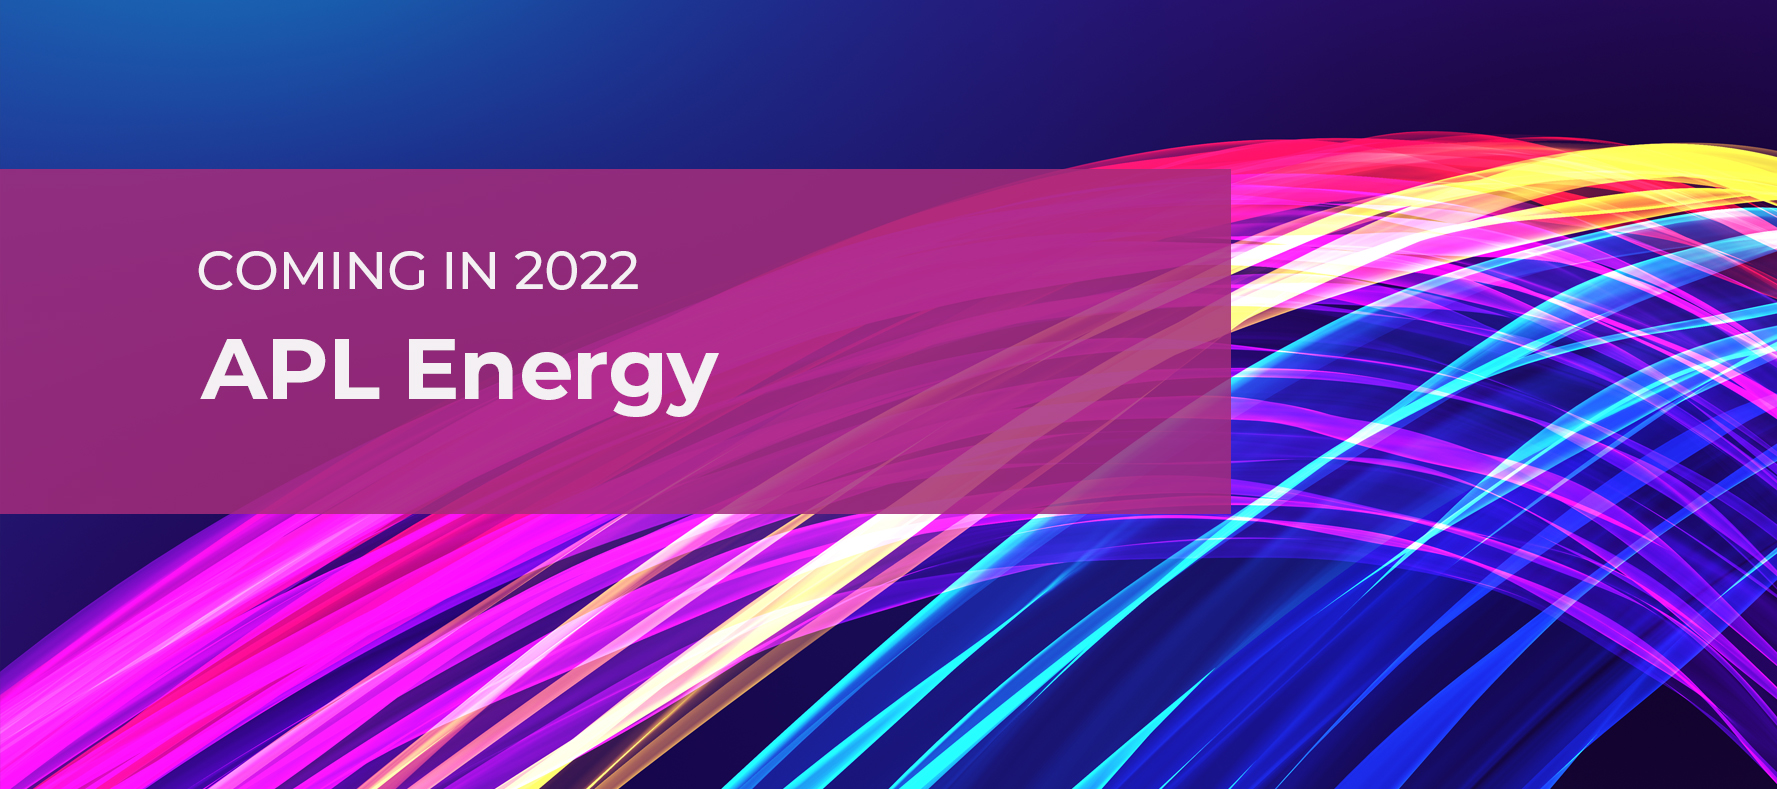 Coming in 2022 - APL Energy